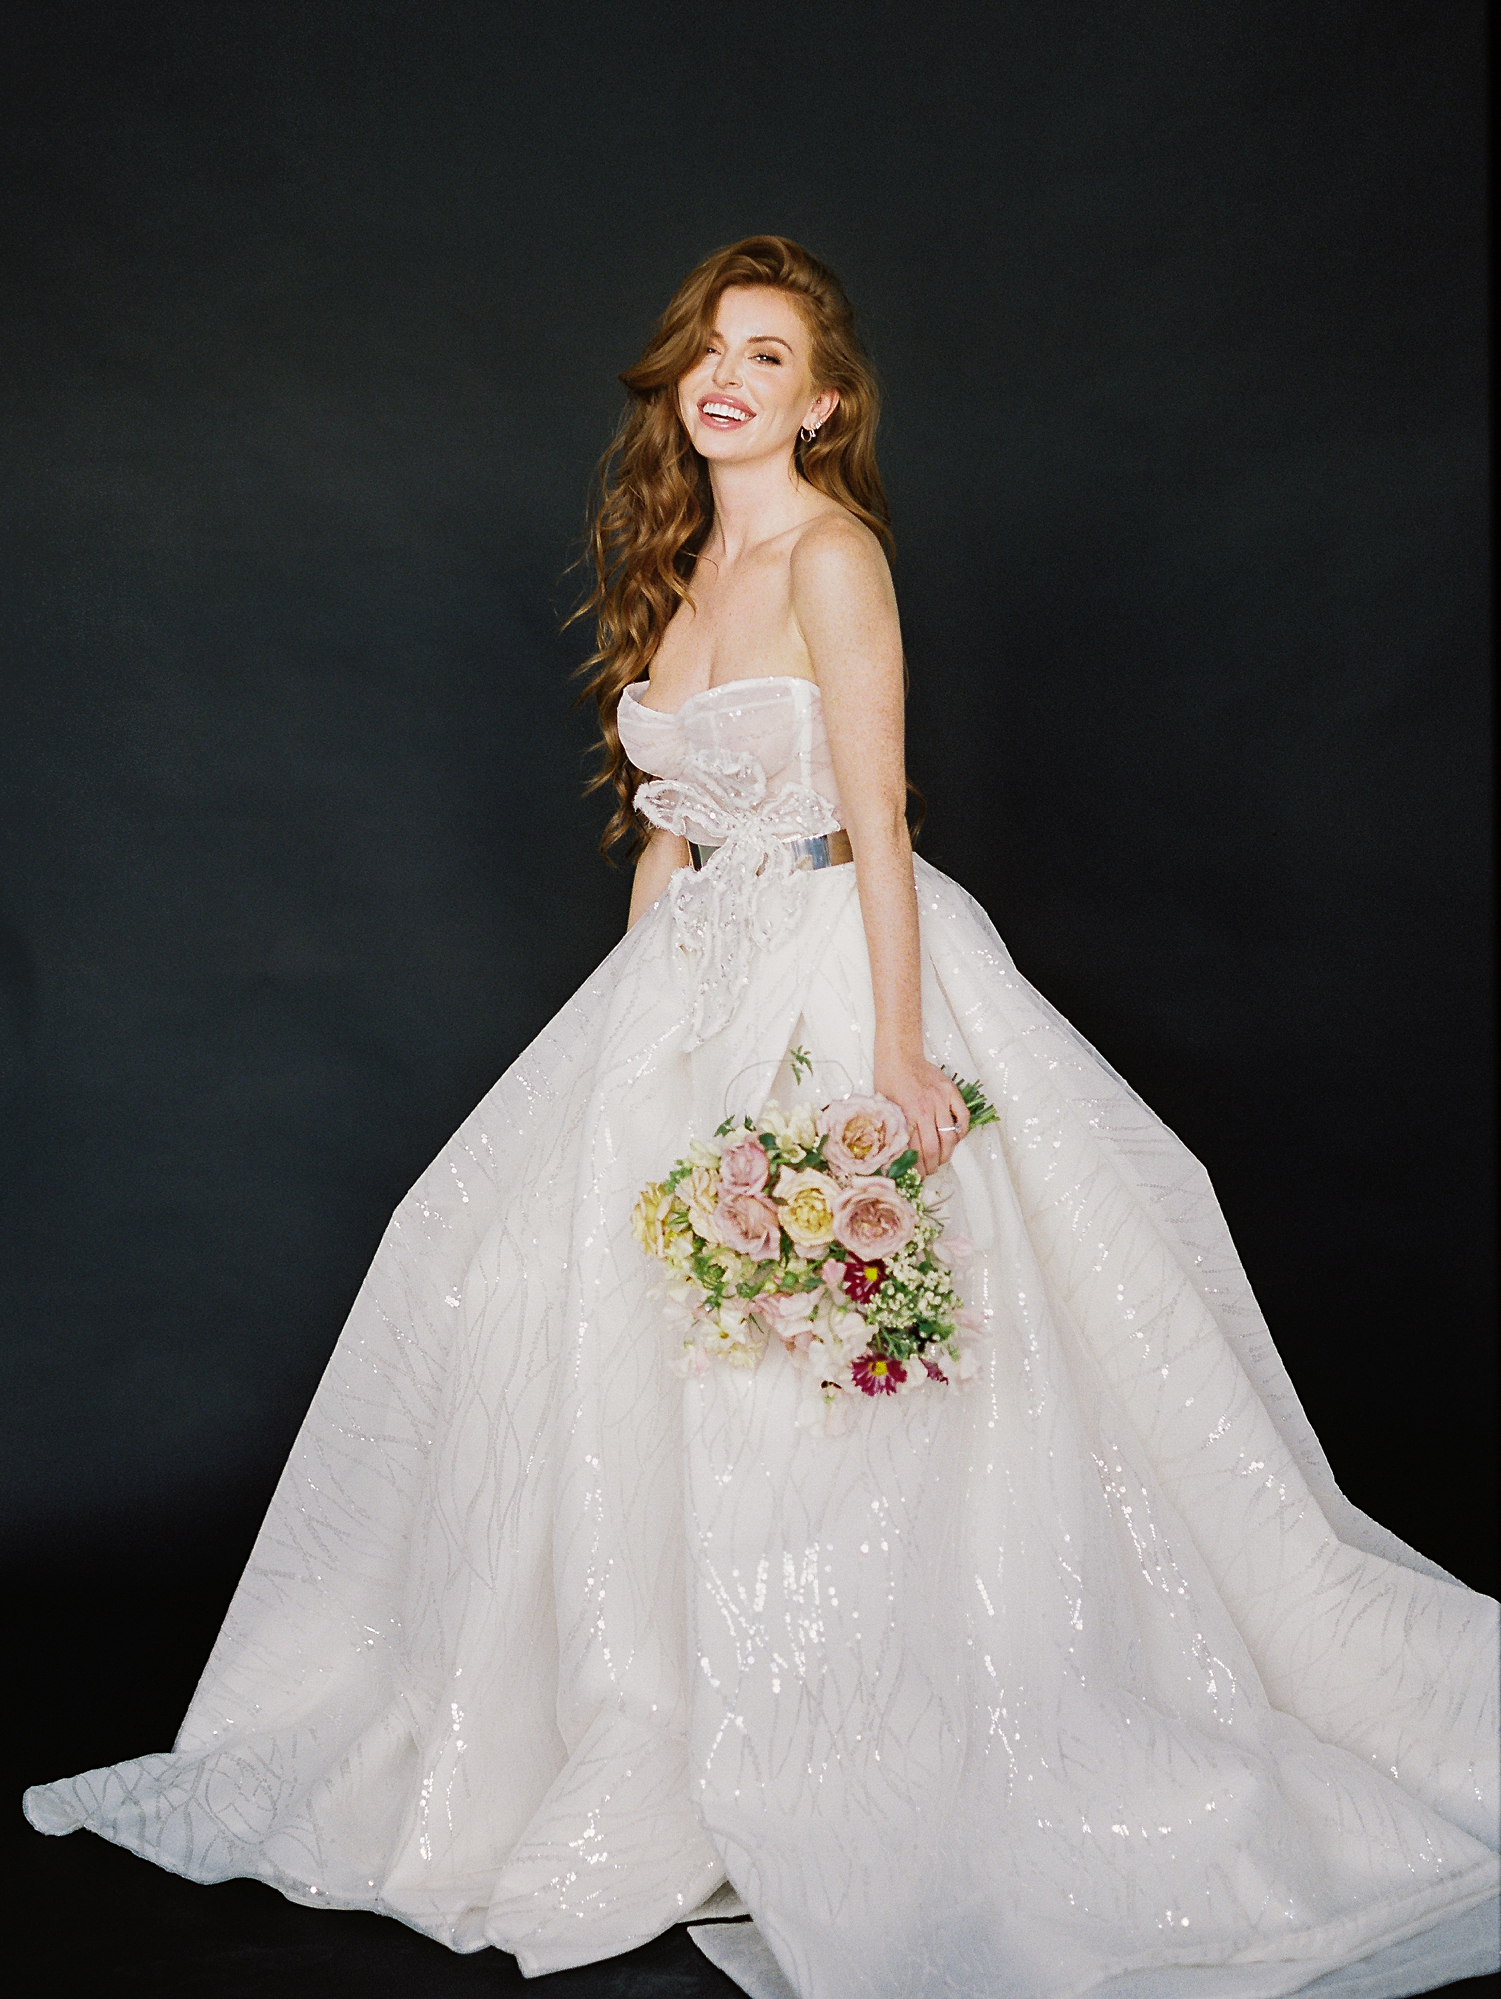 red headed girl in sparkling white wedding gown holding colorful floral bouquet